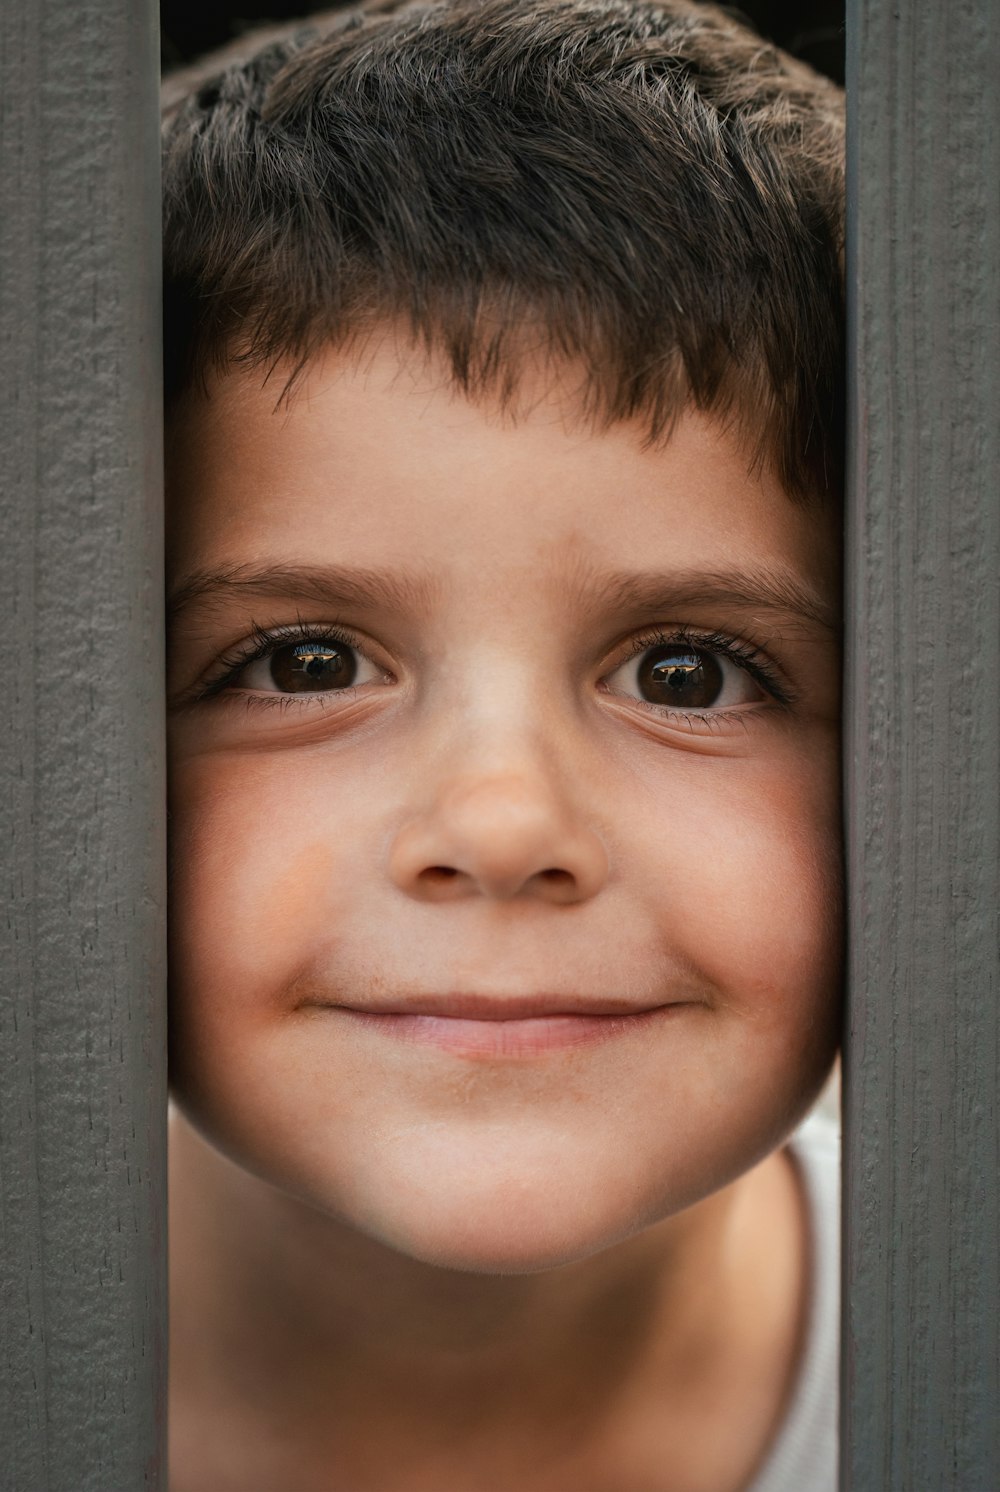 a young boy is smiling through the bars of a fence